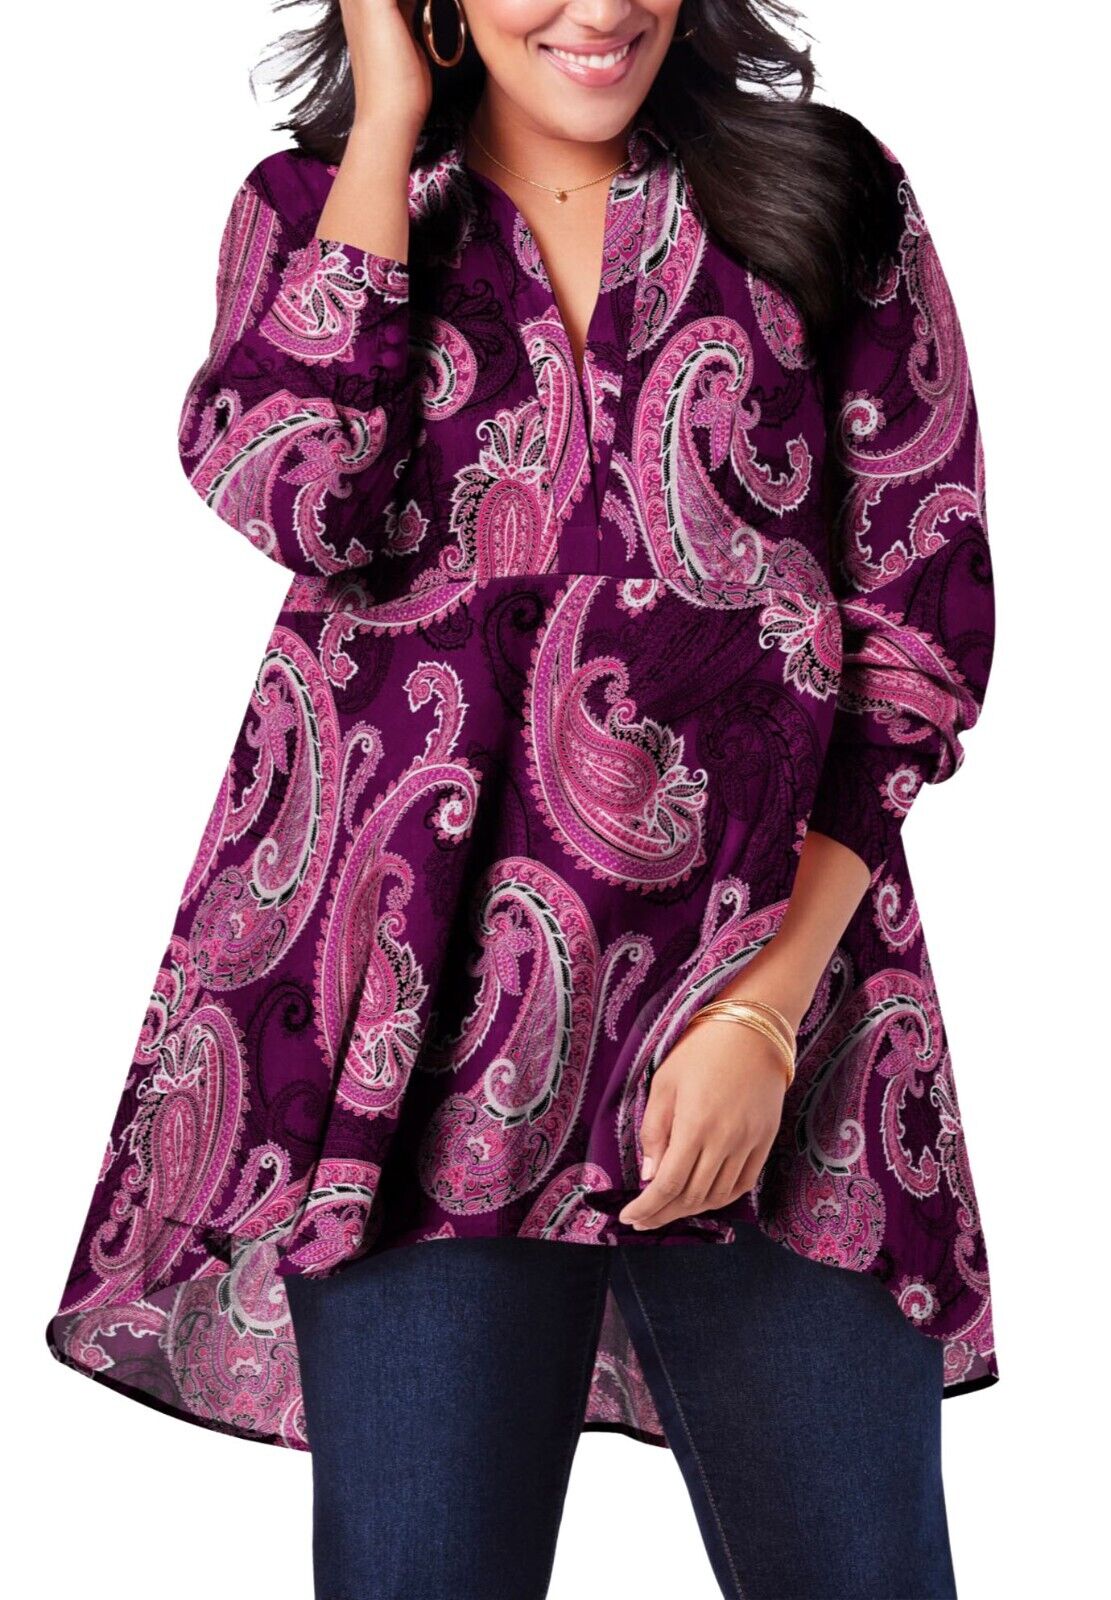 Roamans Purple Paisley Print Fit-And-Flare Crinkle Tunic Sizes 16 22 24 30 34 36